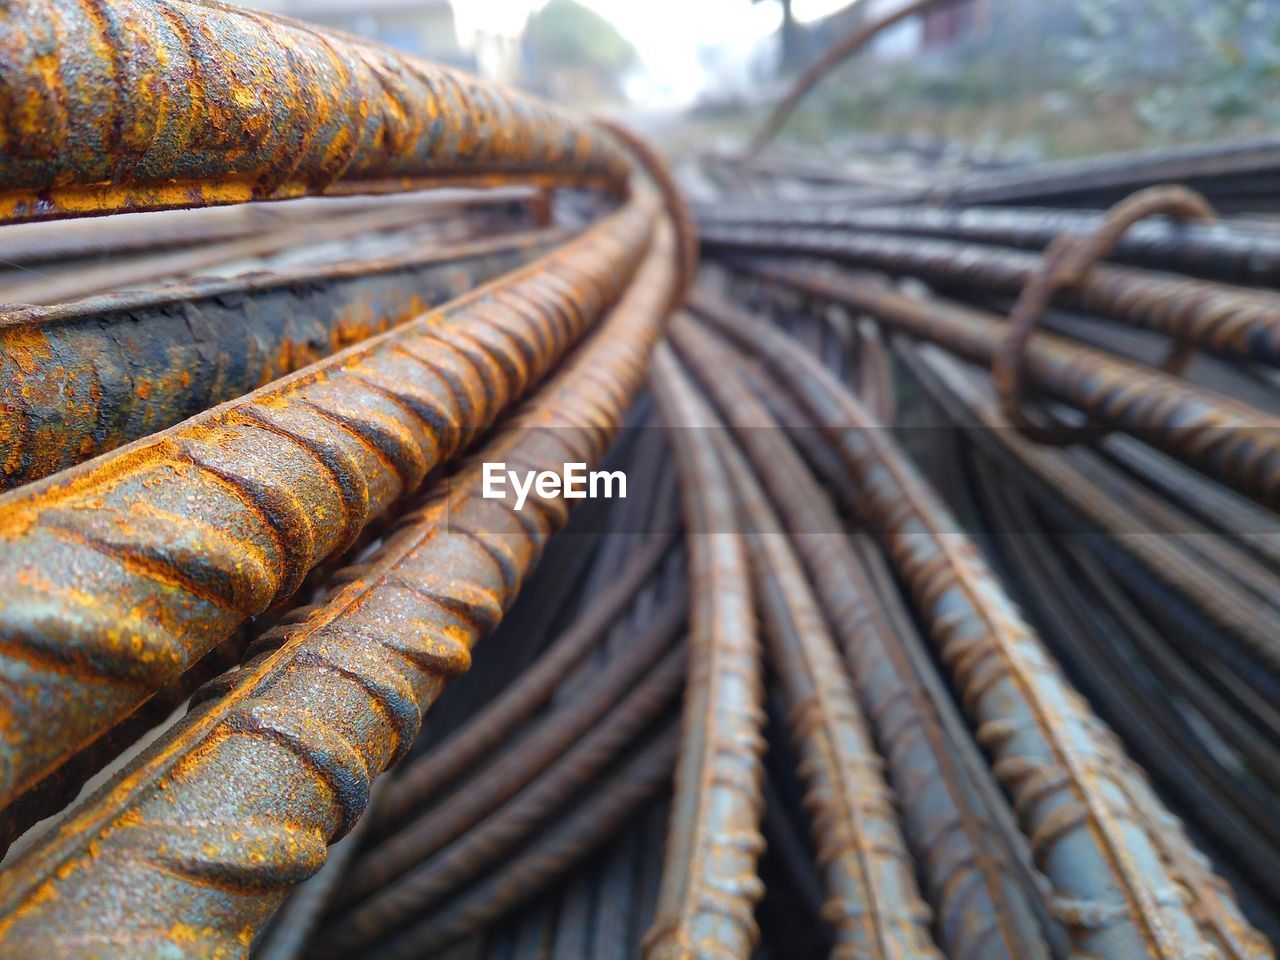 CLOSE-UP OF RUSTY PIPES